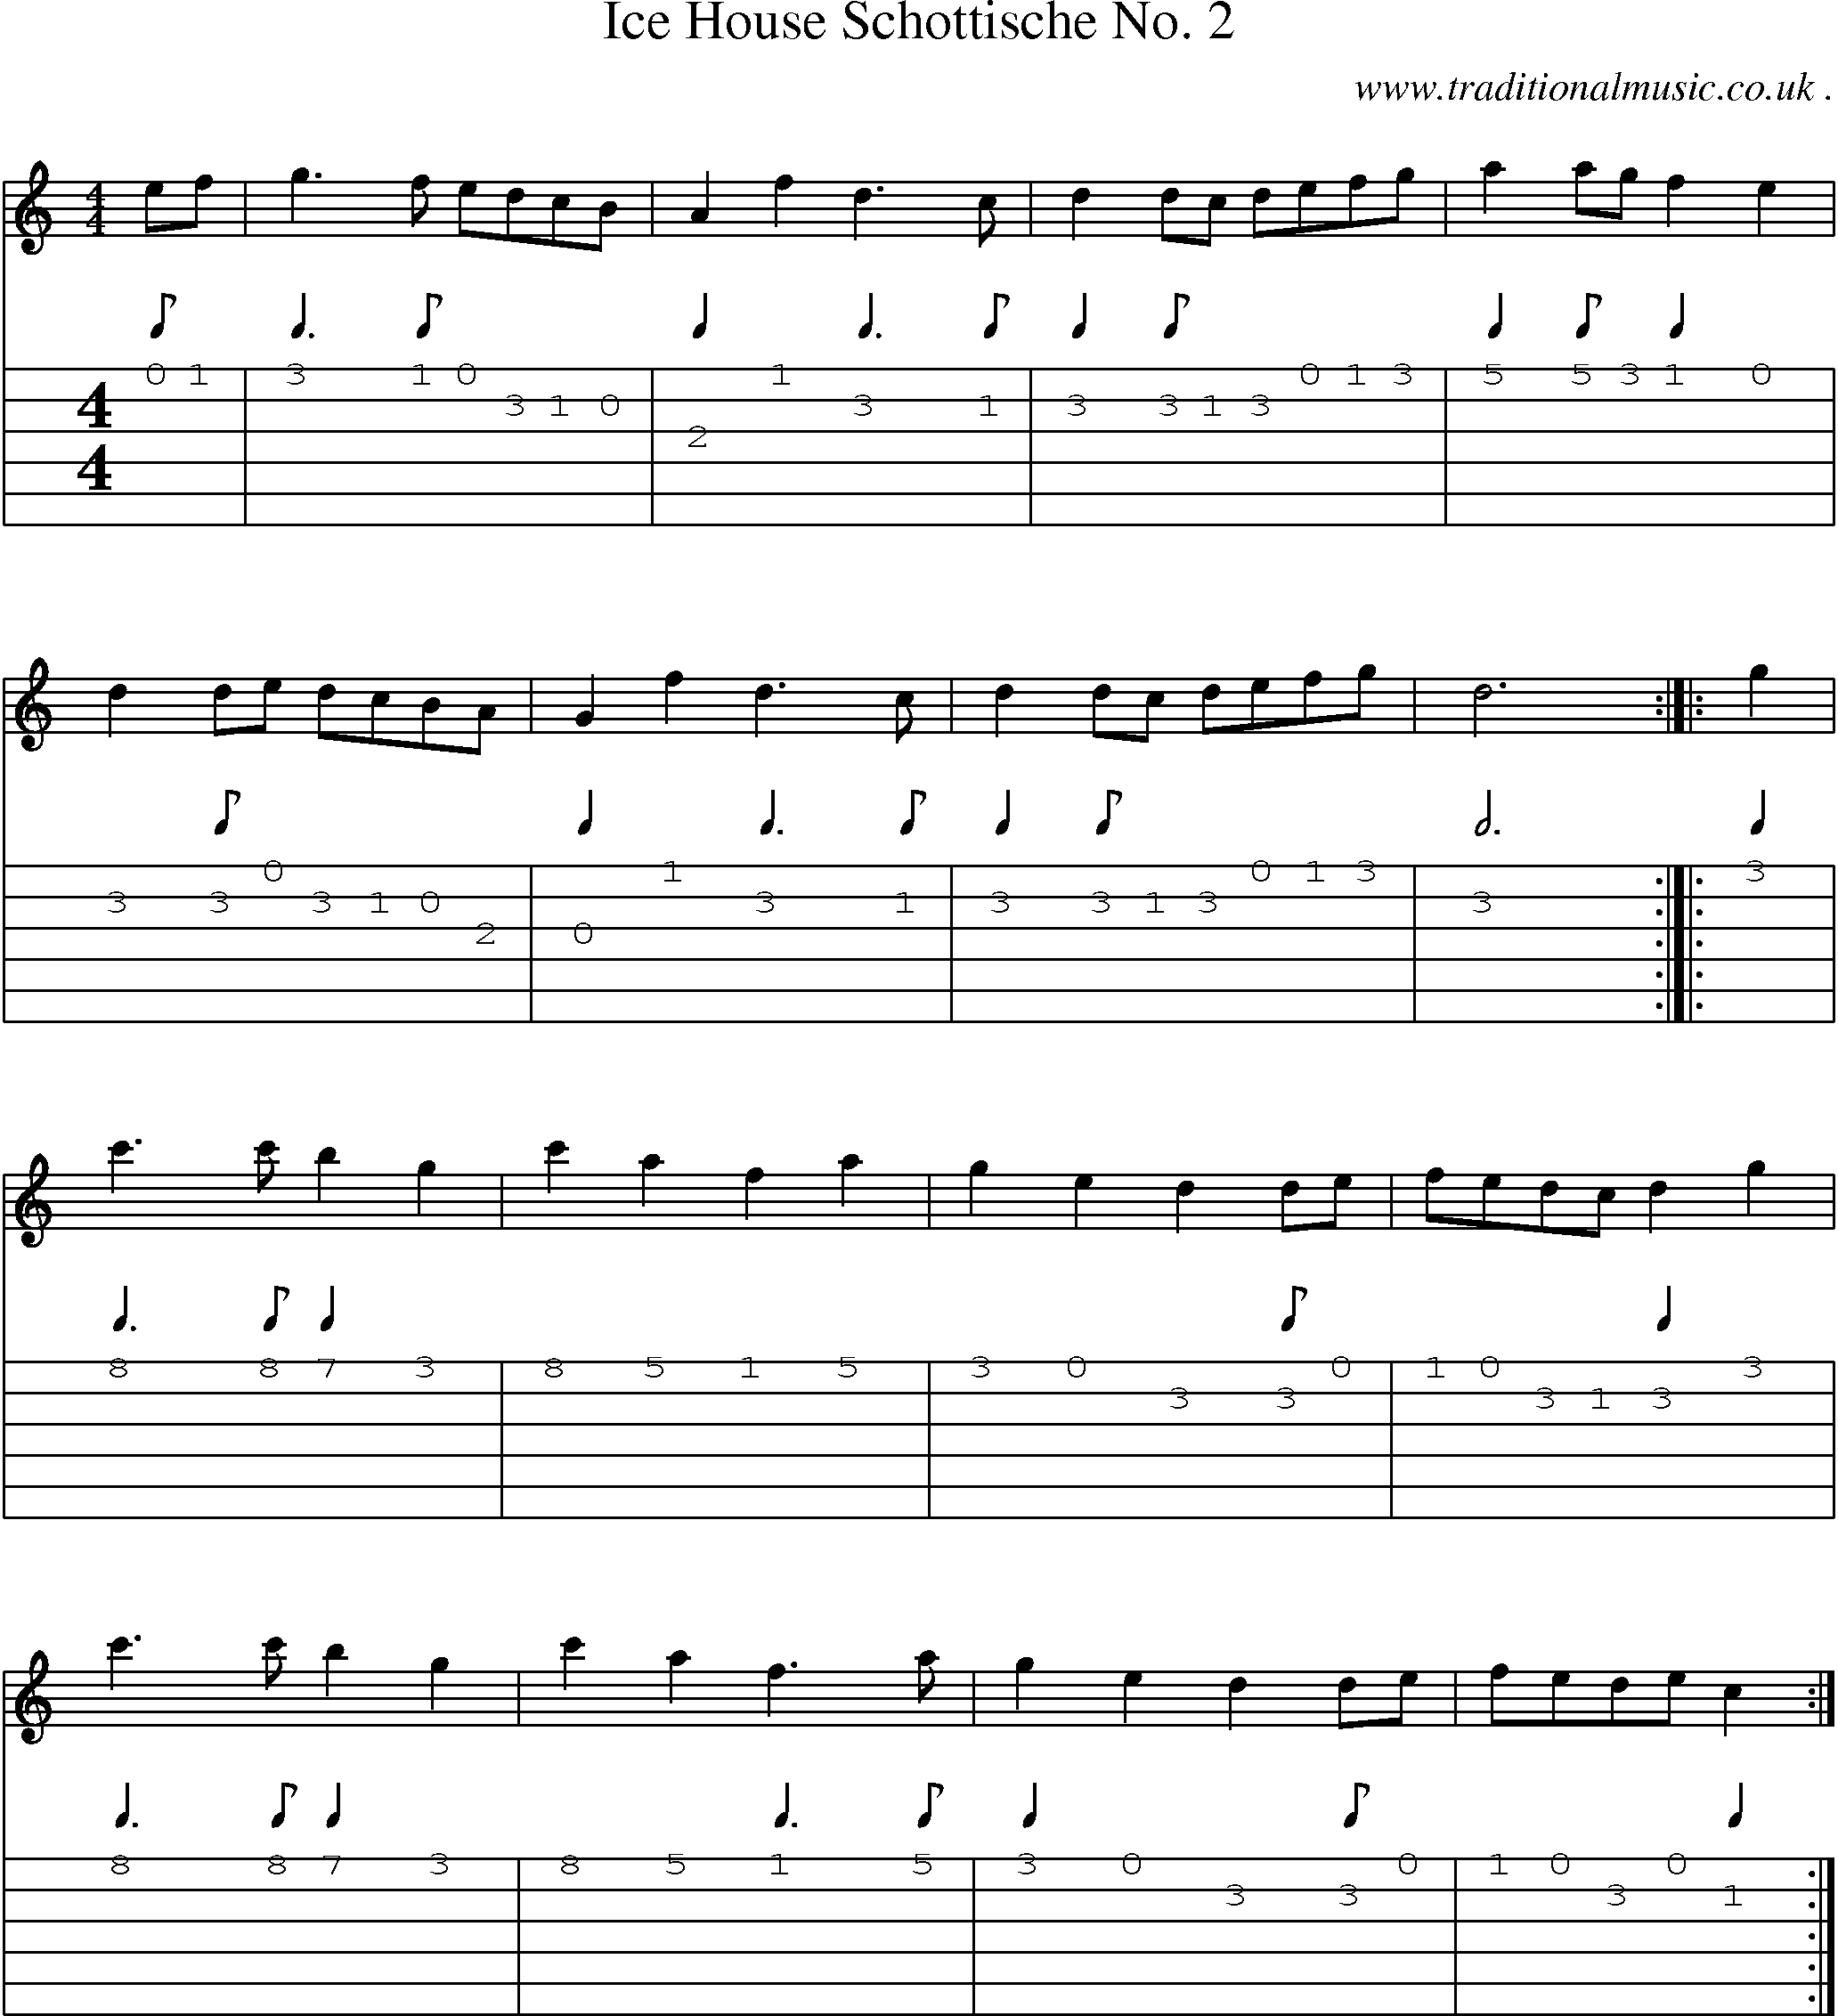 Sheet-Music and Guitar Tabs for Ice House Schottische No 2